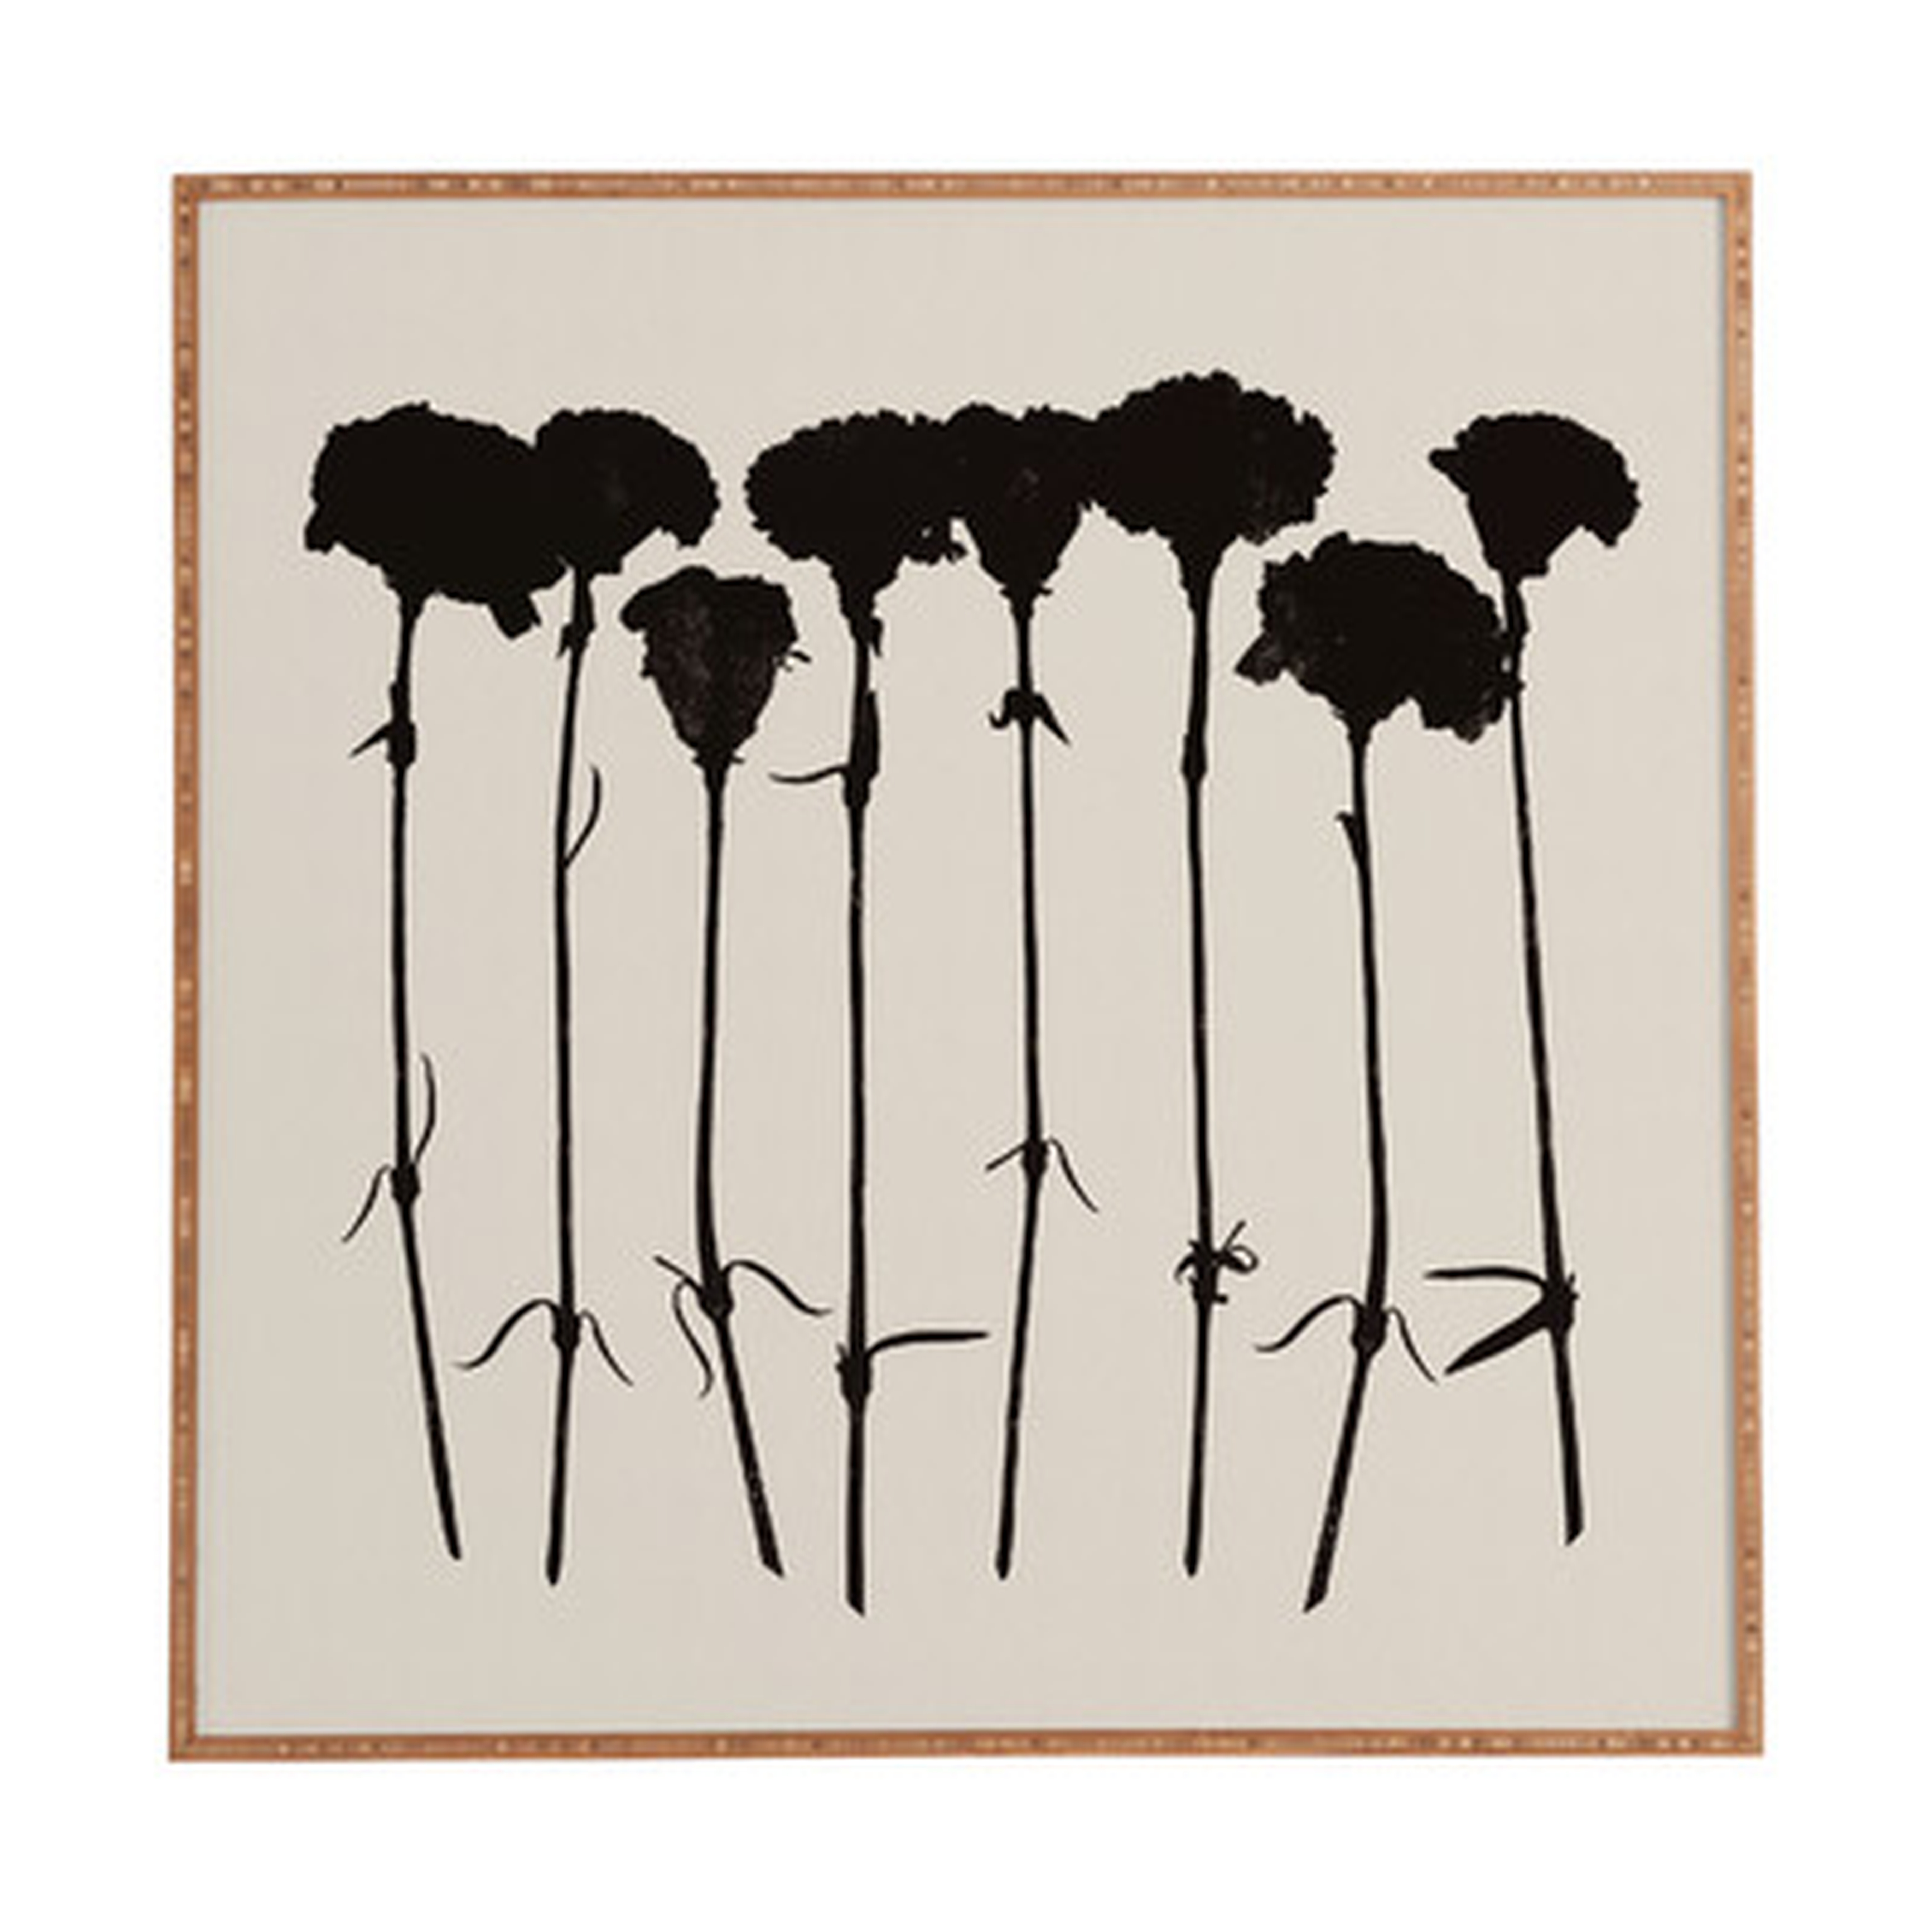 Carnations by Garima Dhawan Framed Graphic Art Plaque in Black - Wayfair